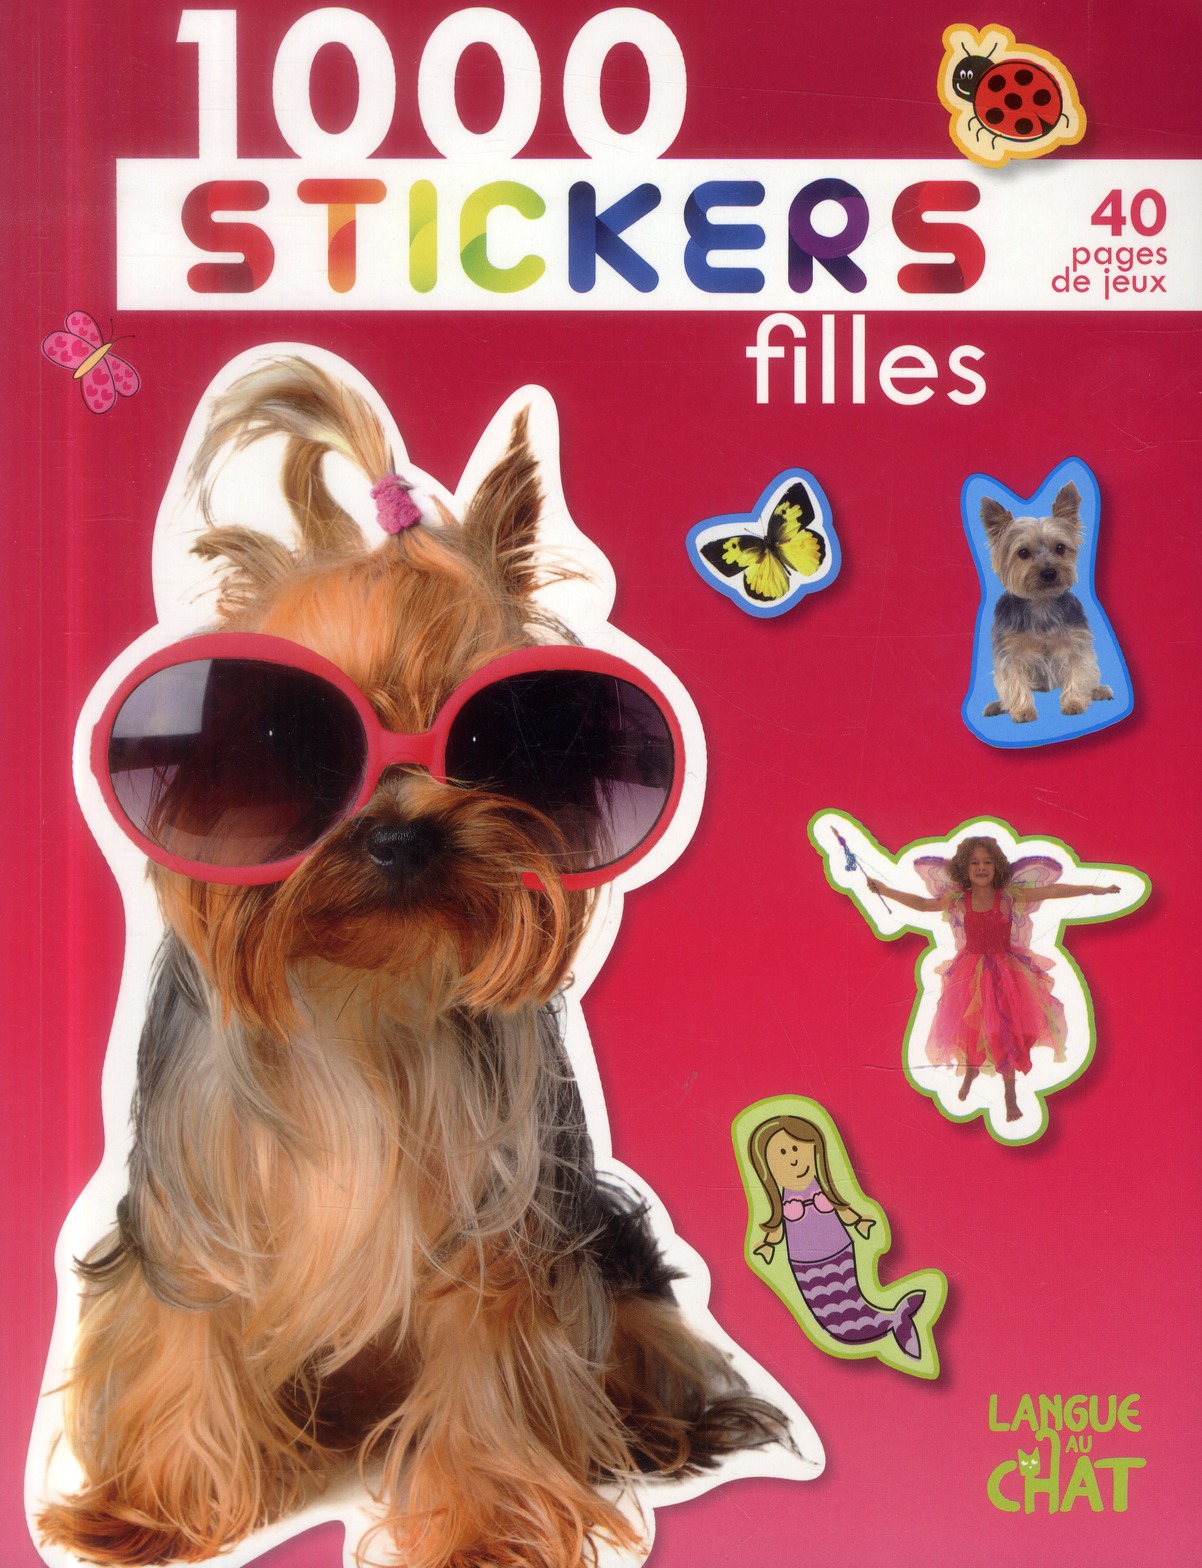 1000 STICKERS FILLES (FOND ROSE)